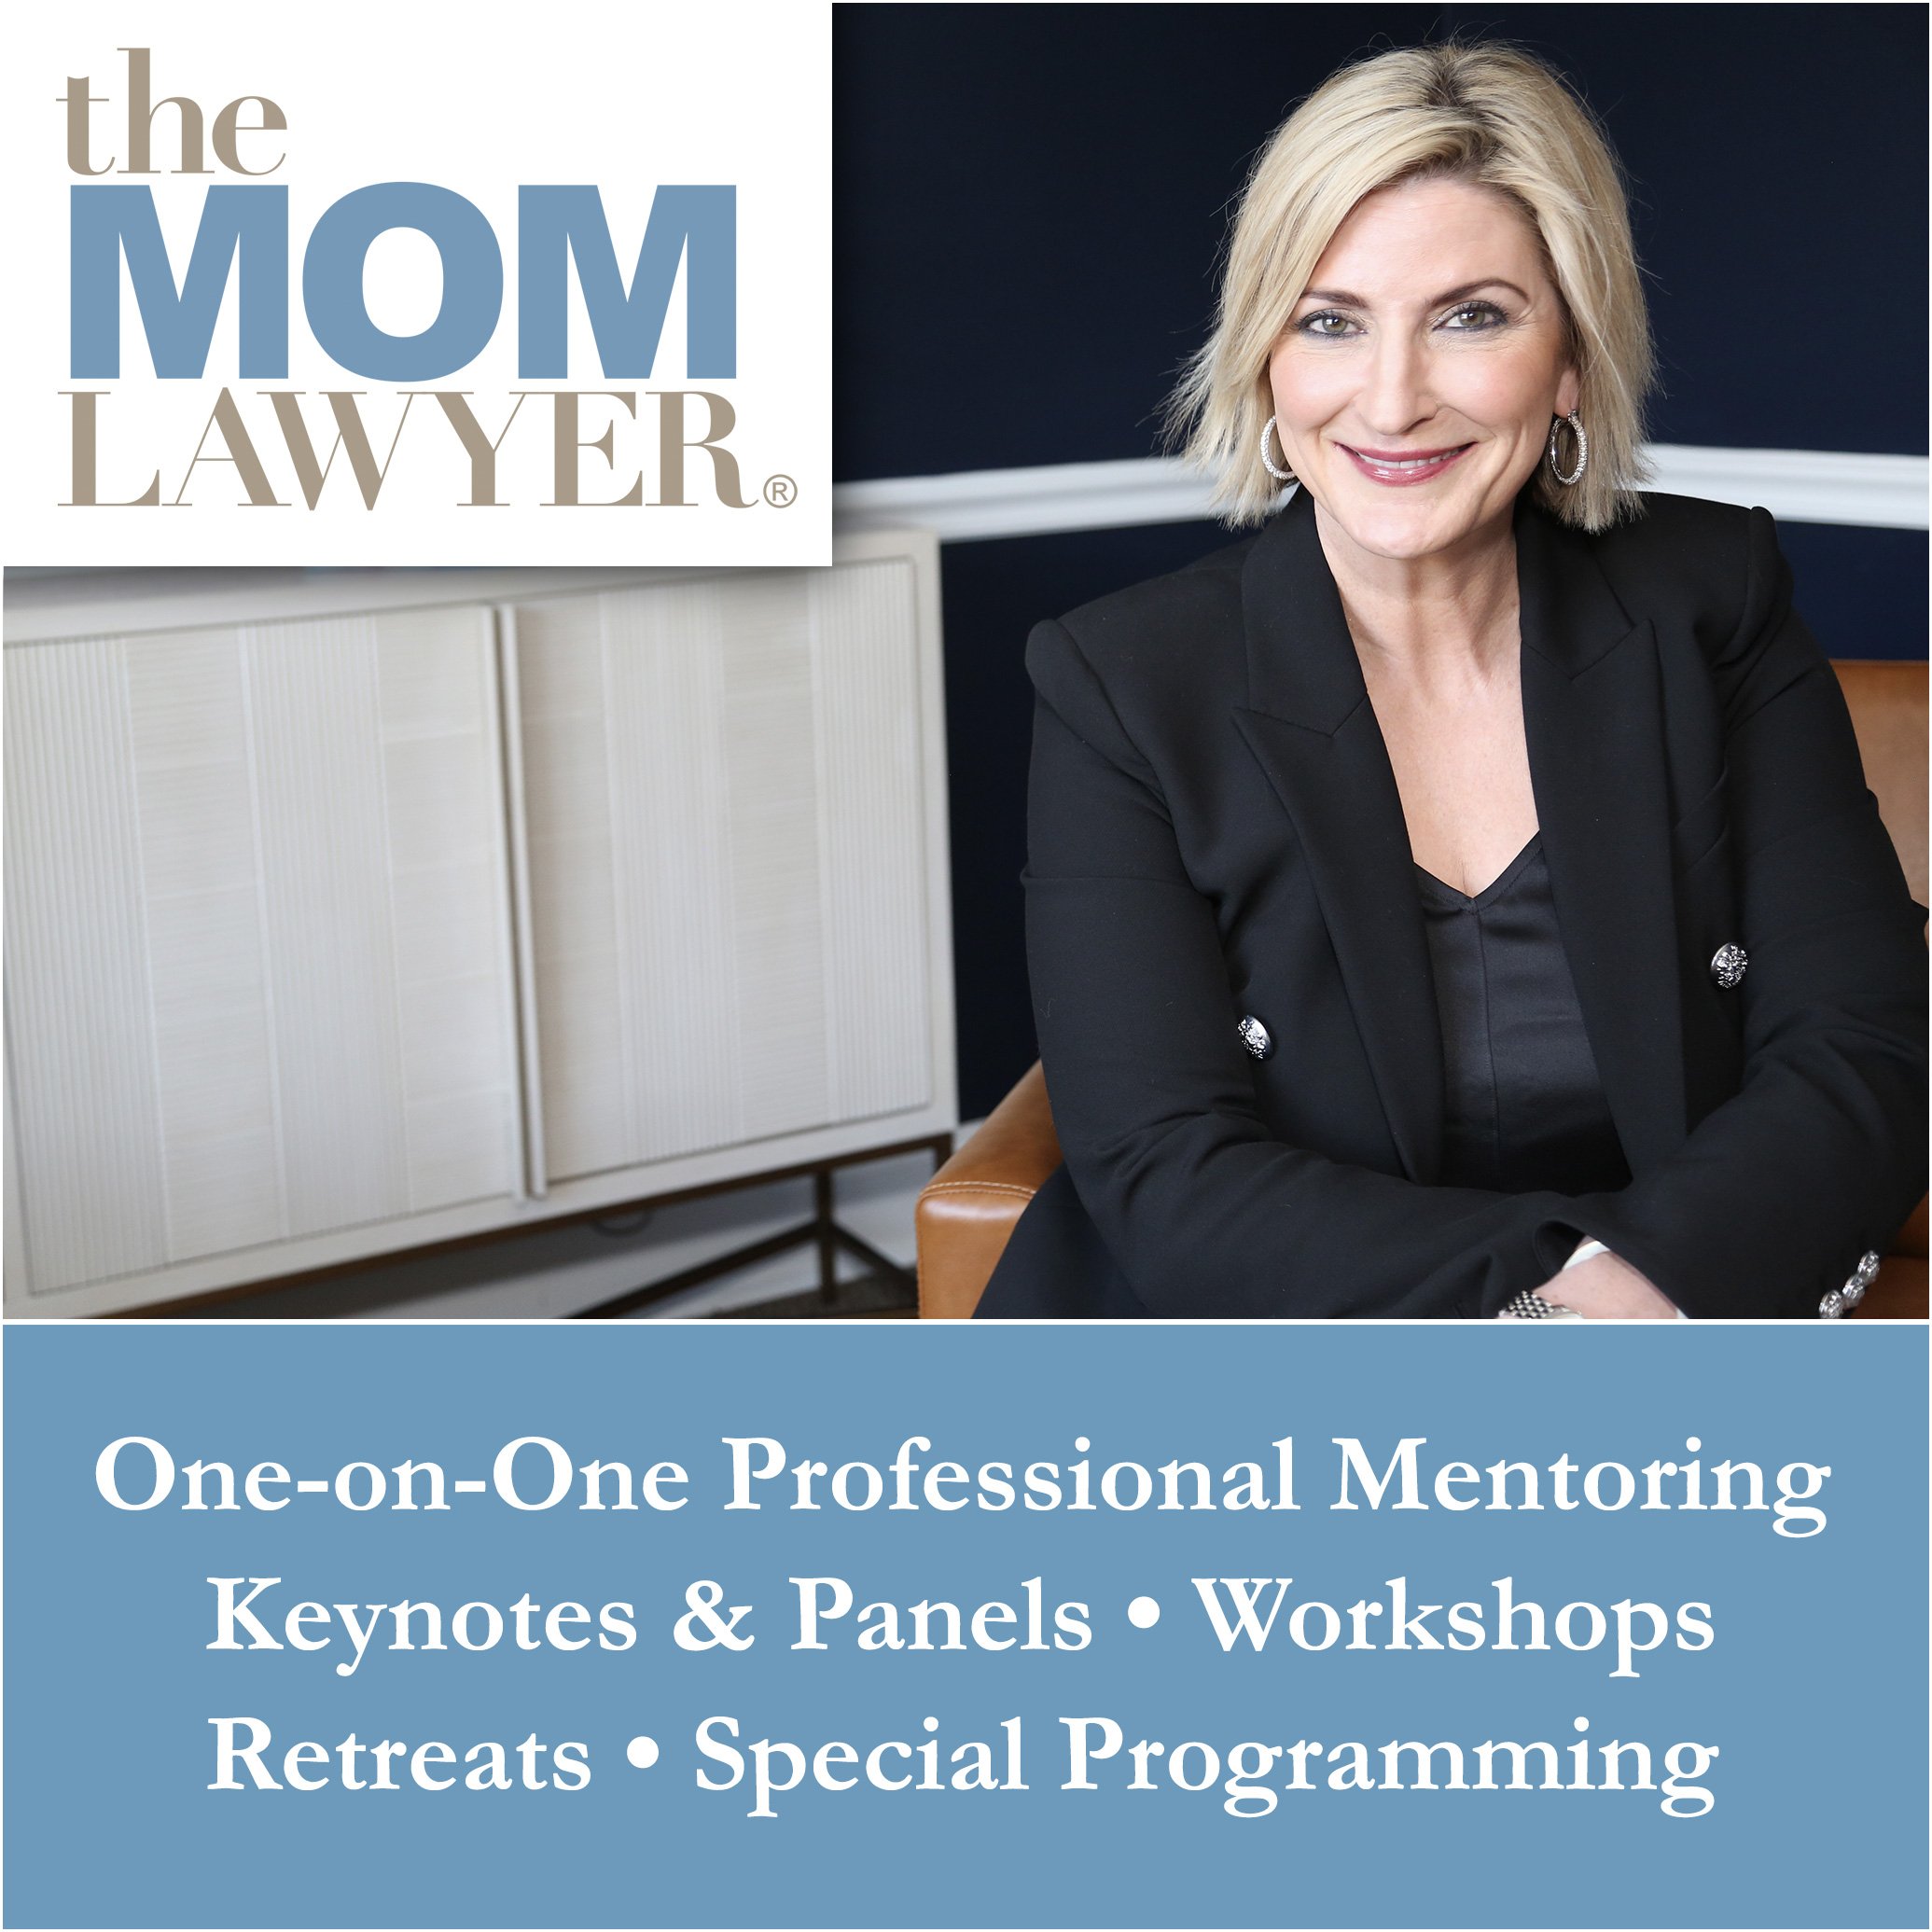 The Mom Lawyer Mentoring, Keynote Speaking, Workshops, Retreats and Special Programming